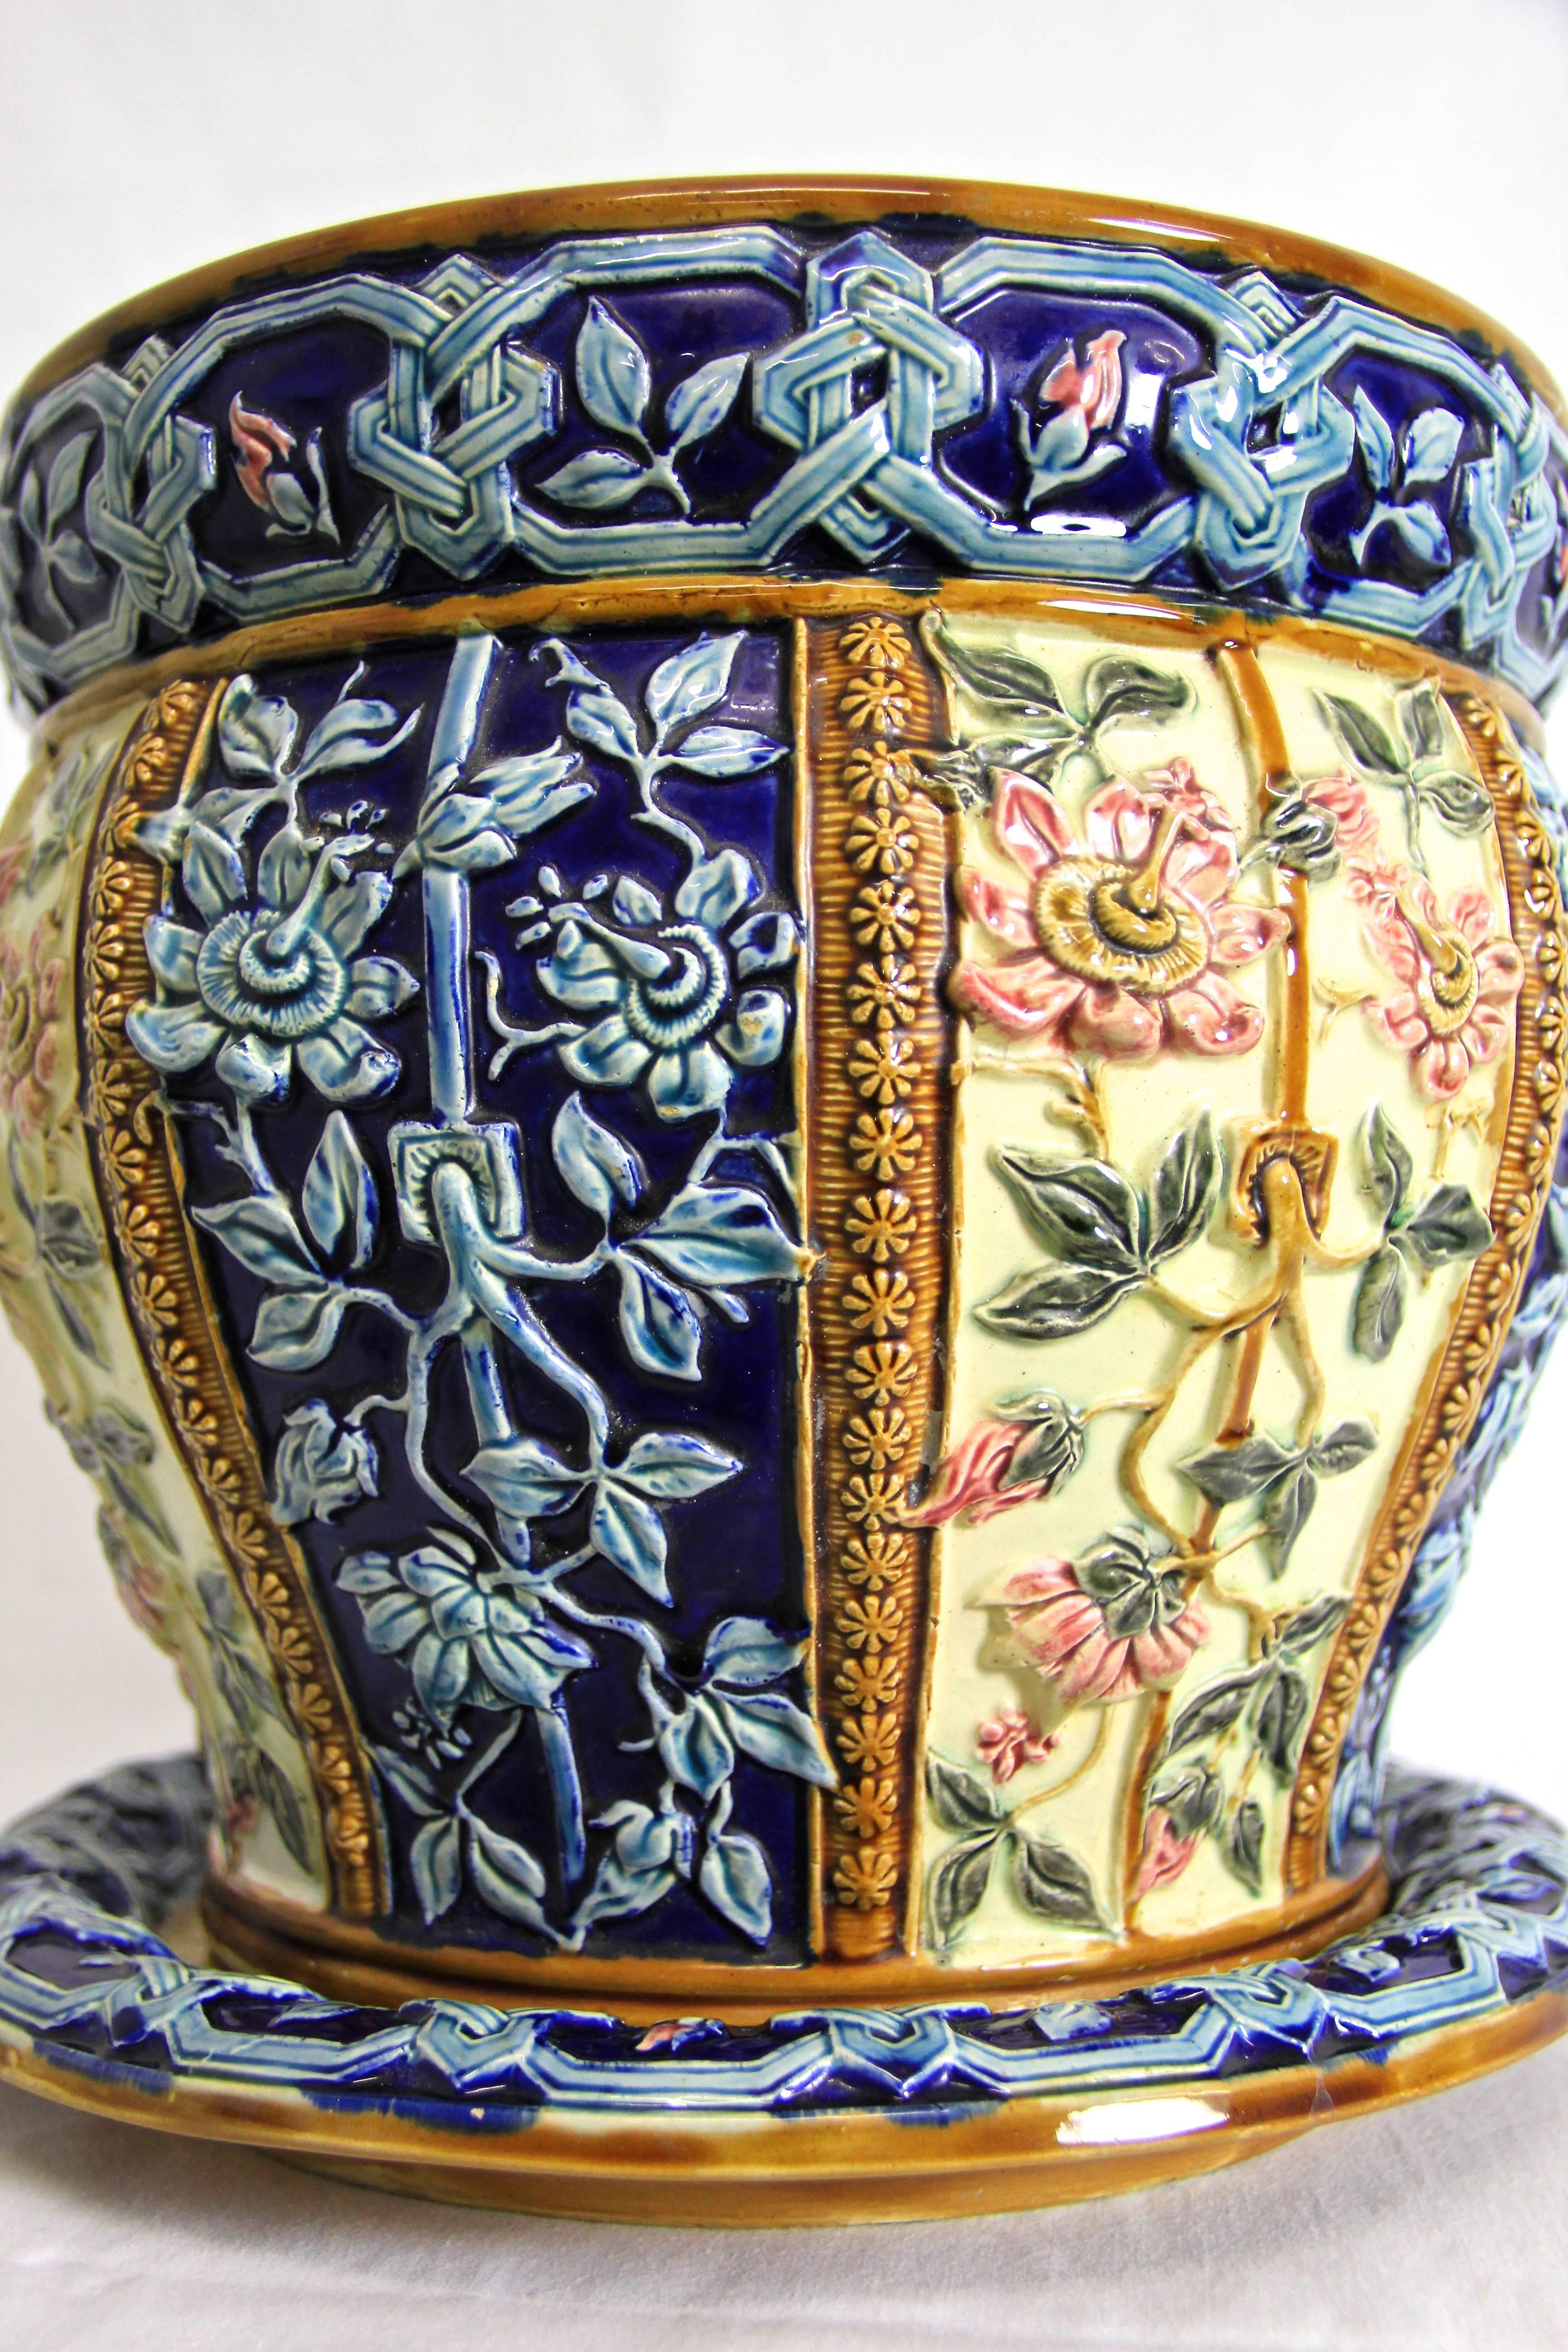 Another Majolica masterpiece from Wilhelm Schiller & Son, circa 1900. The hand-painted floral design was made with passion to details and is highlighted by a beautiful color composition.
Wilhelm Schiller began production of porcelain and